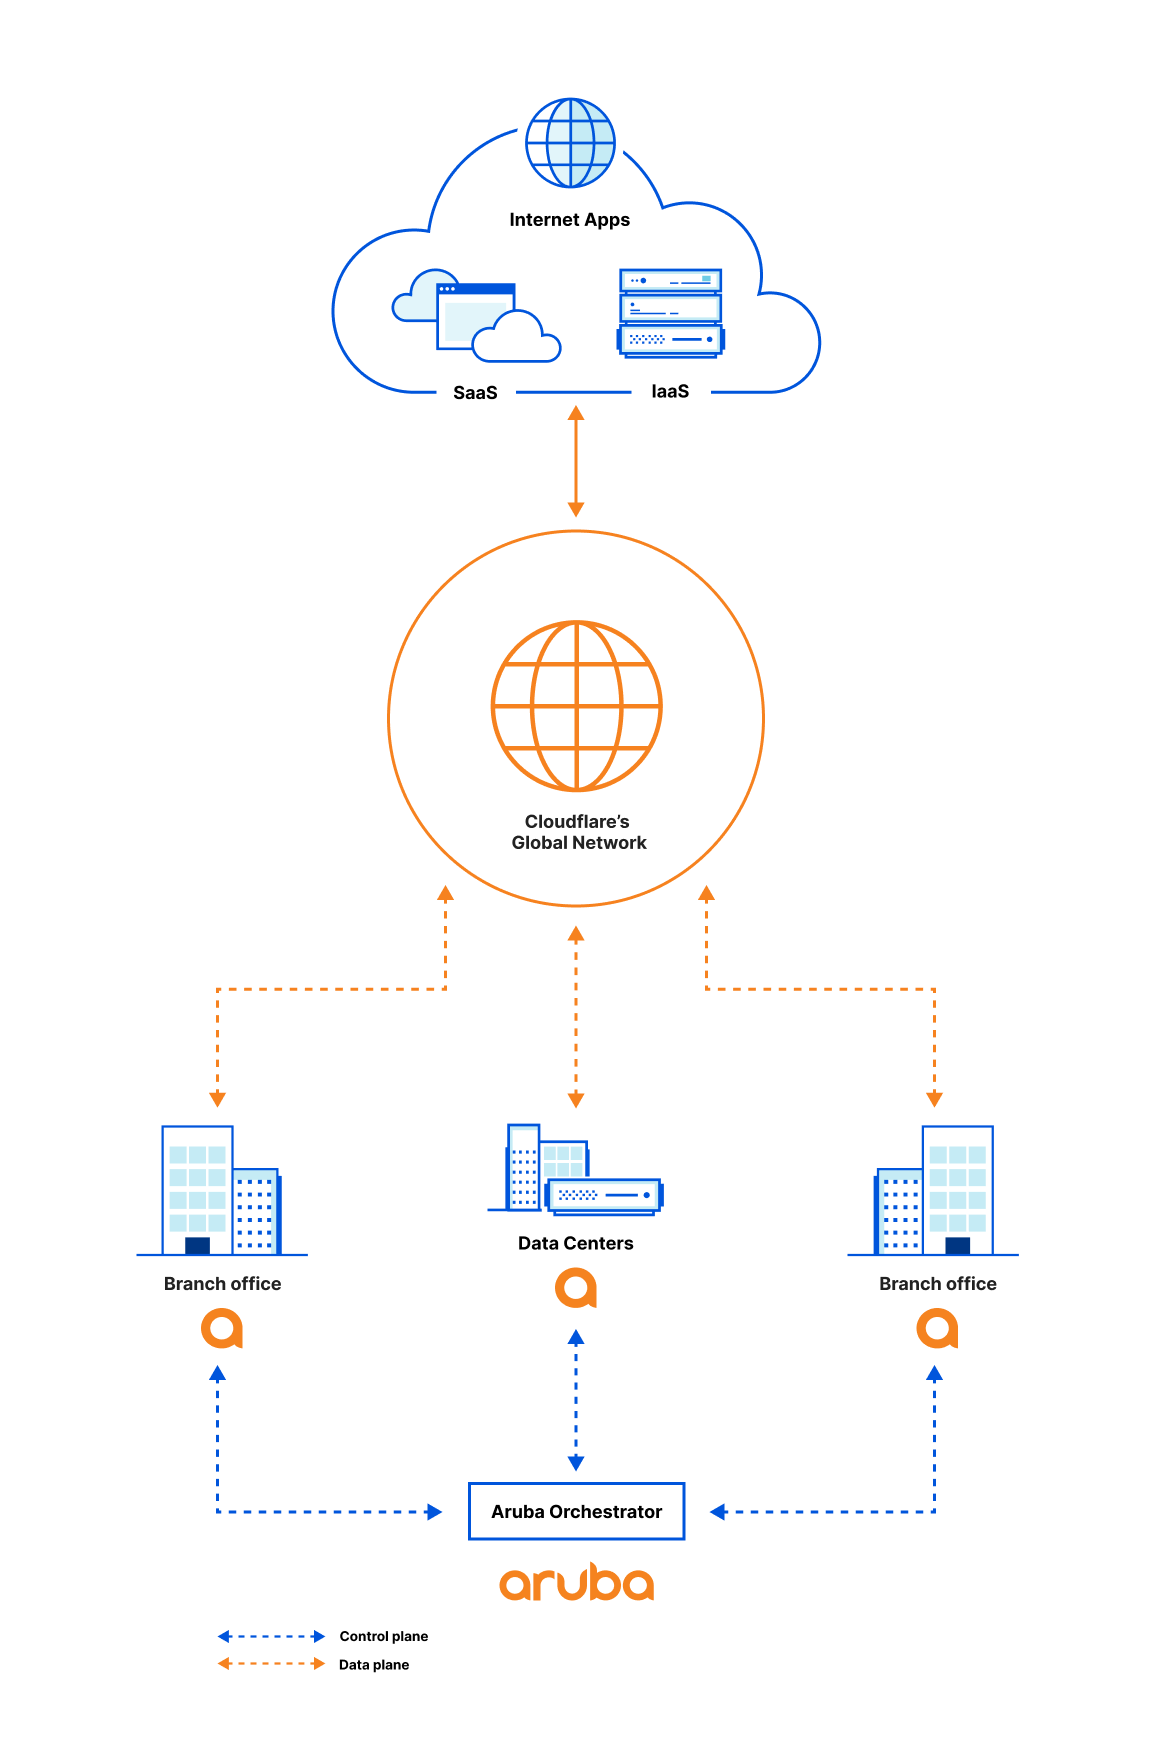 Cloudflare and Aruba partner to deliver a seamless global secure network from the branch to the cloud